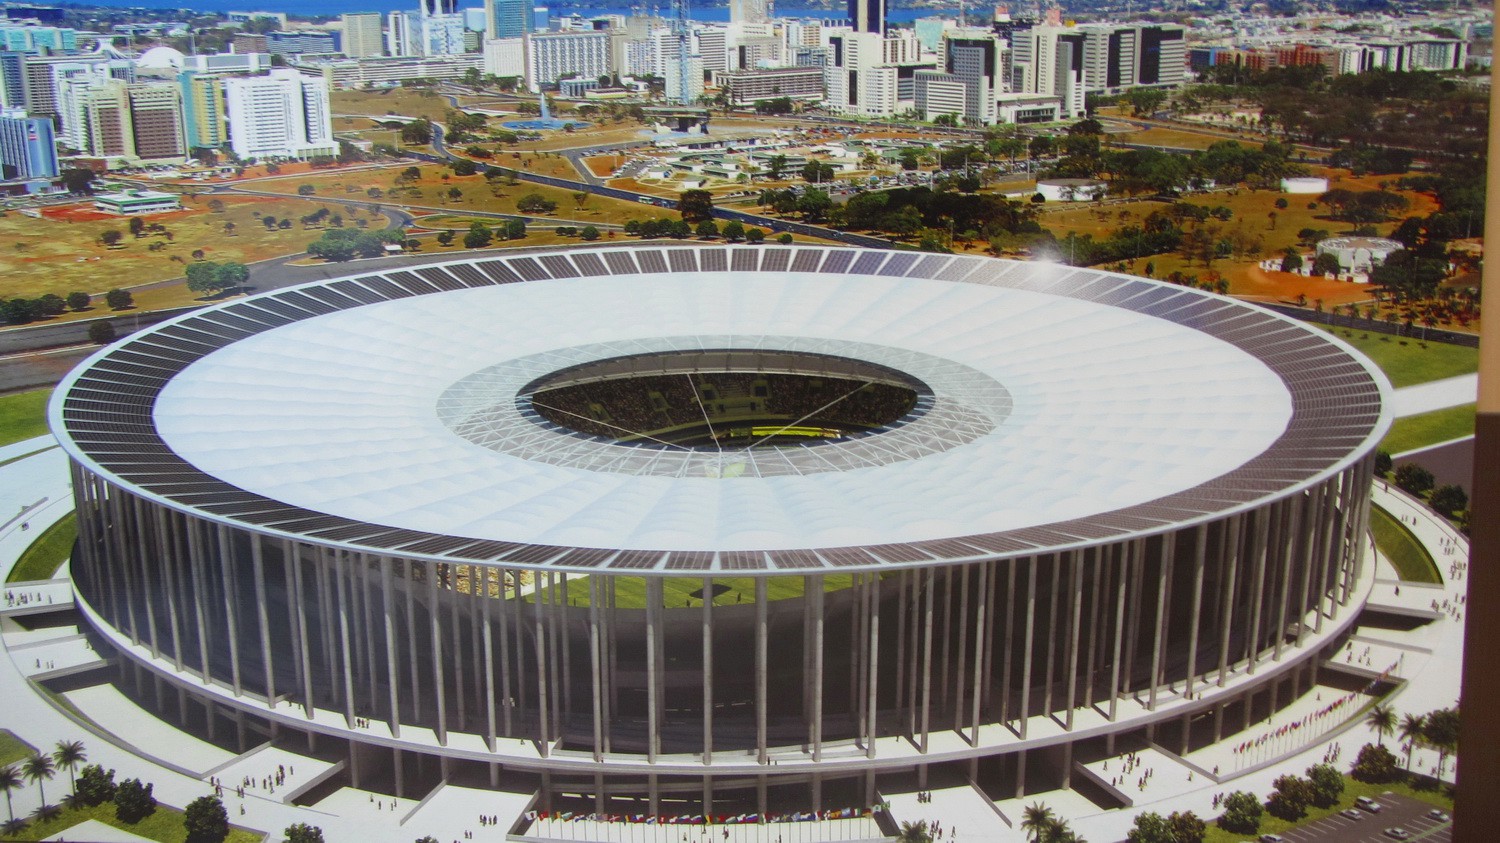 Model of the new stadium for the next soccer world championship 2014